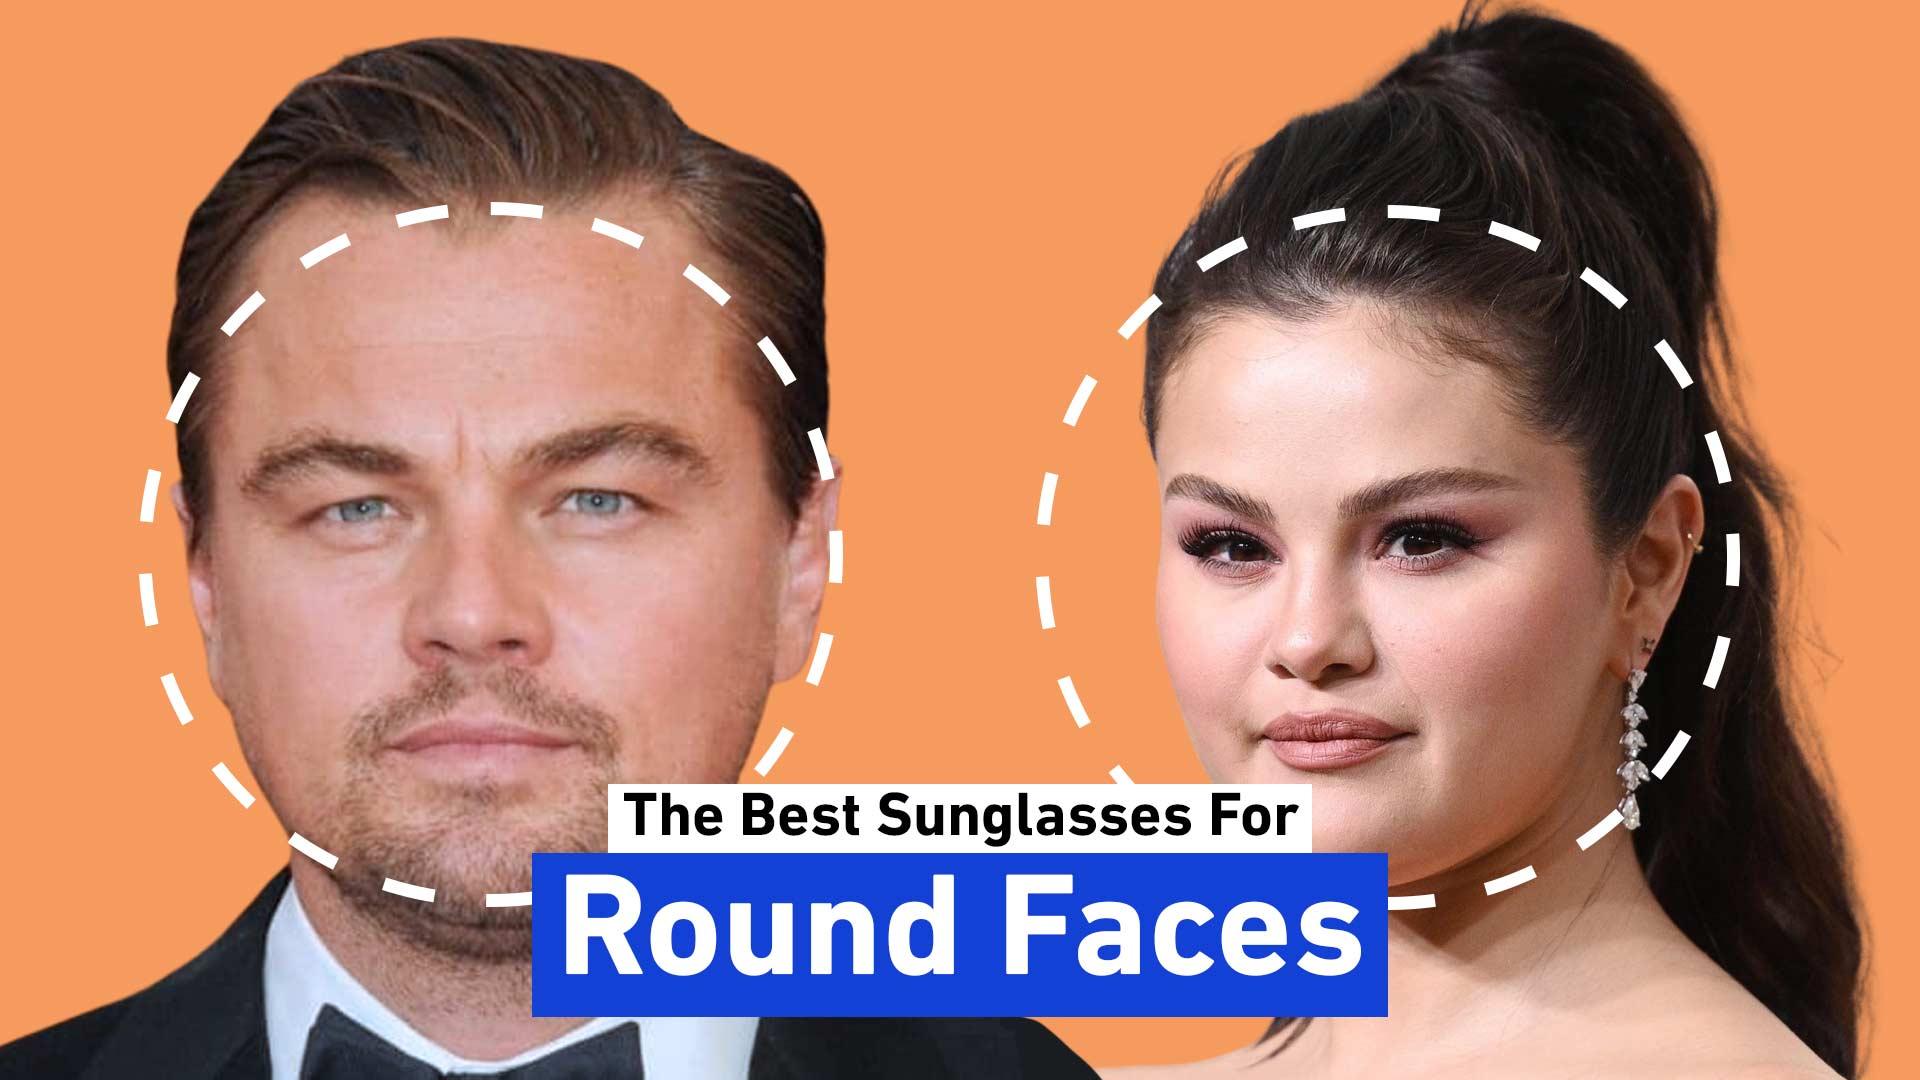 The Best Sunglasses For Round Faces